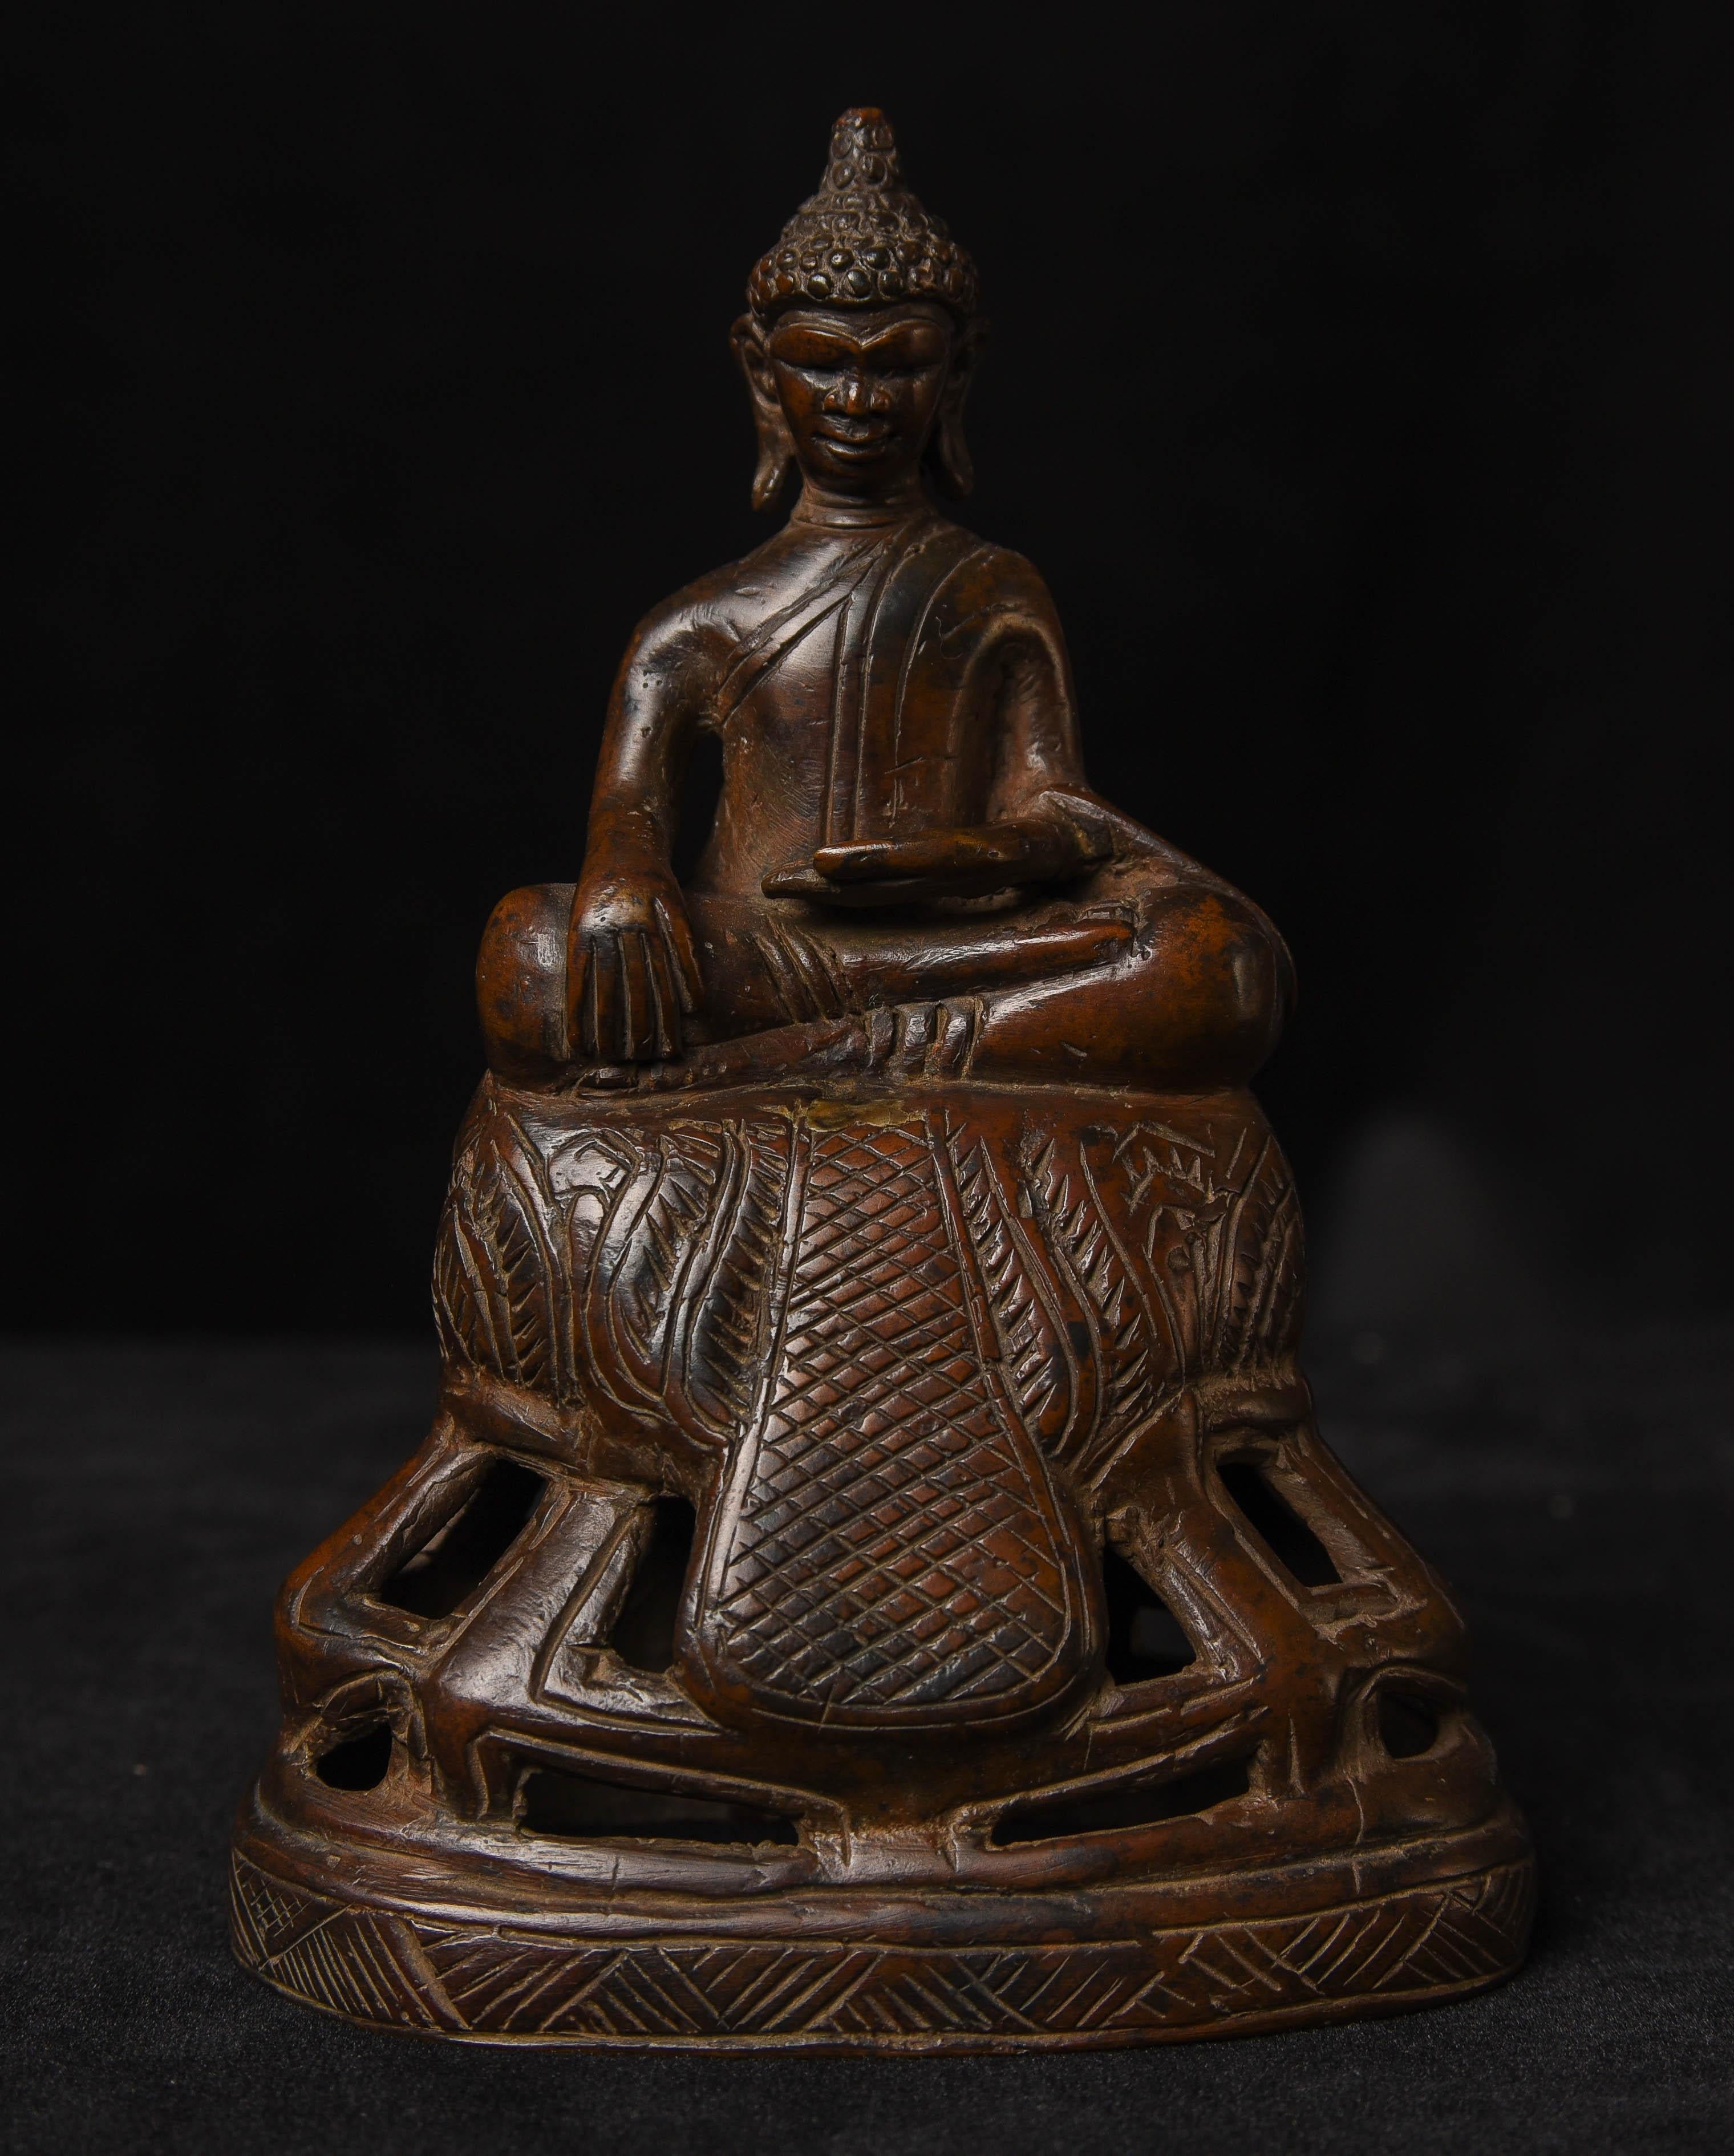 A very fine 17/18thC Cambodian Buddha with a wonderful face, base, and patina. This piece measures 5